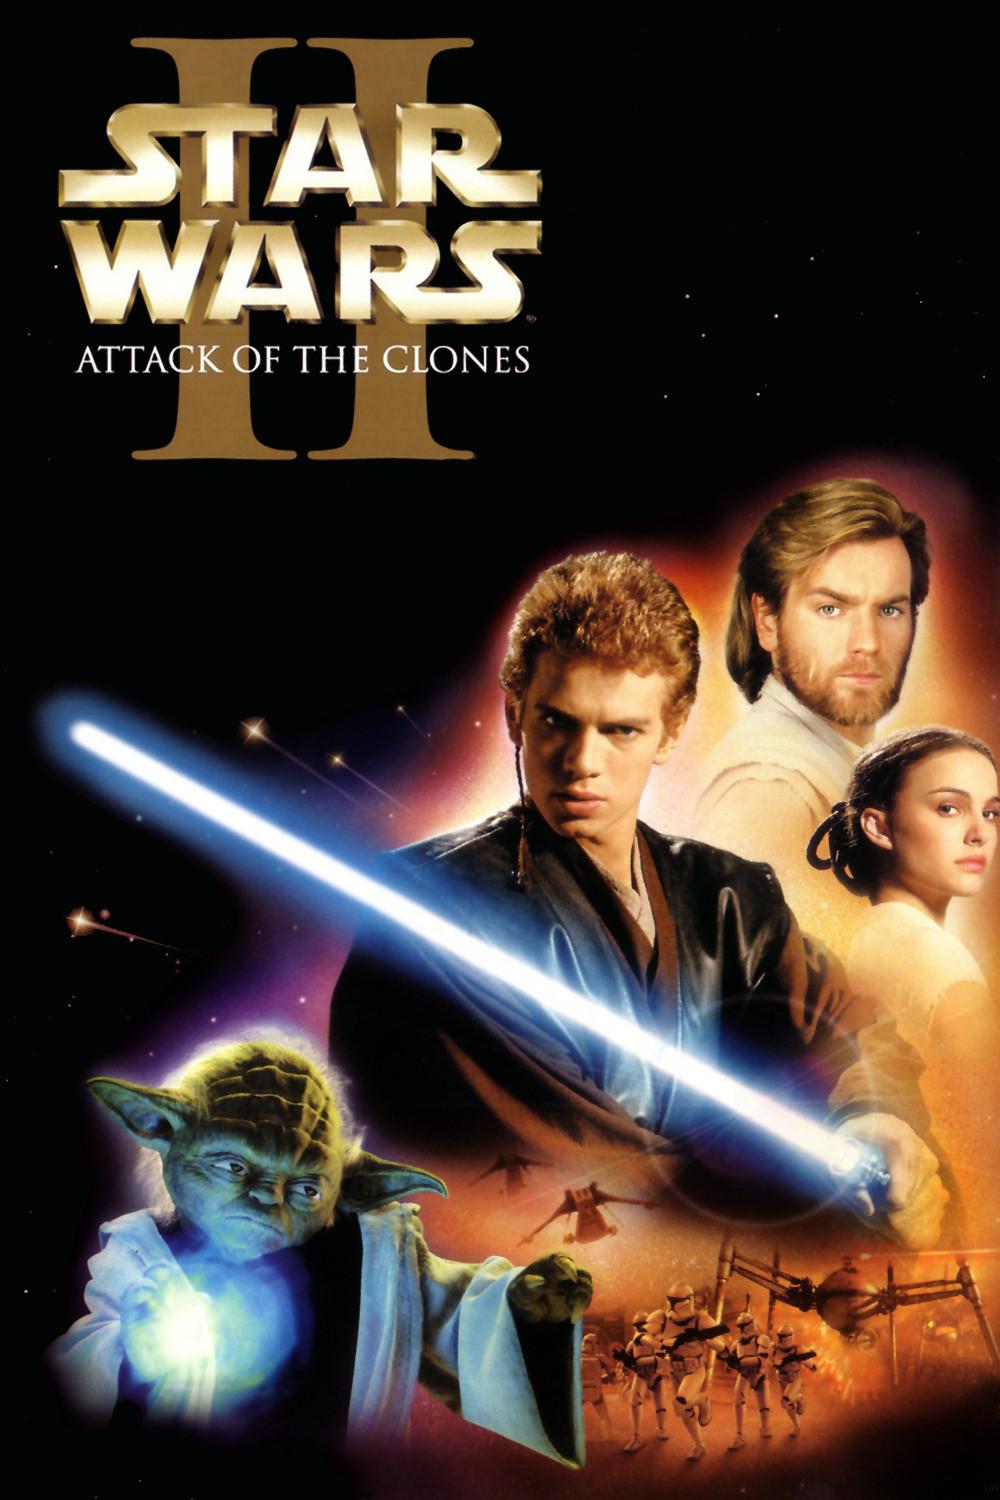 star-wars-attack-of-the-clones-episode-2-ii-movie-poster.jpg